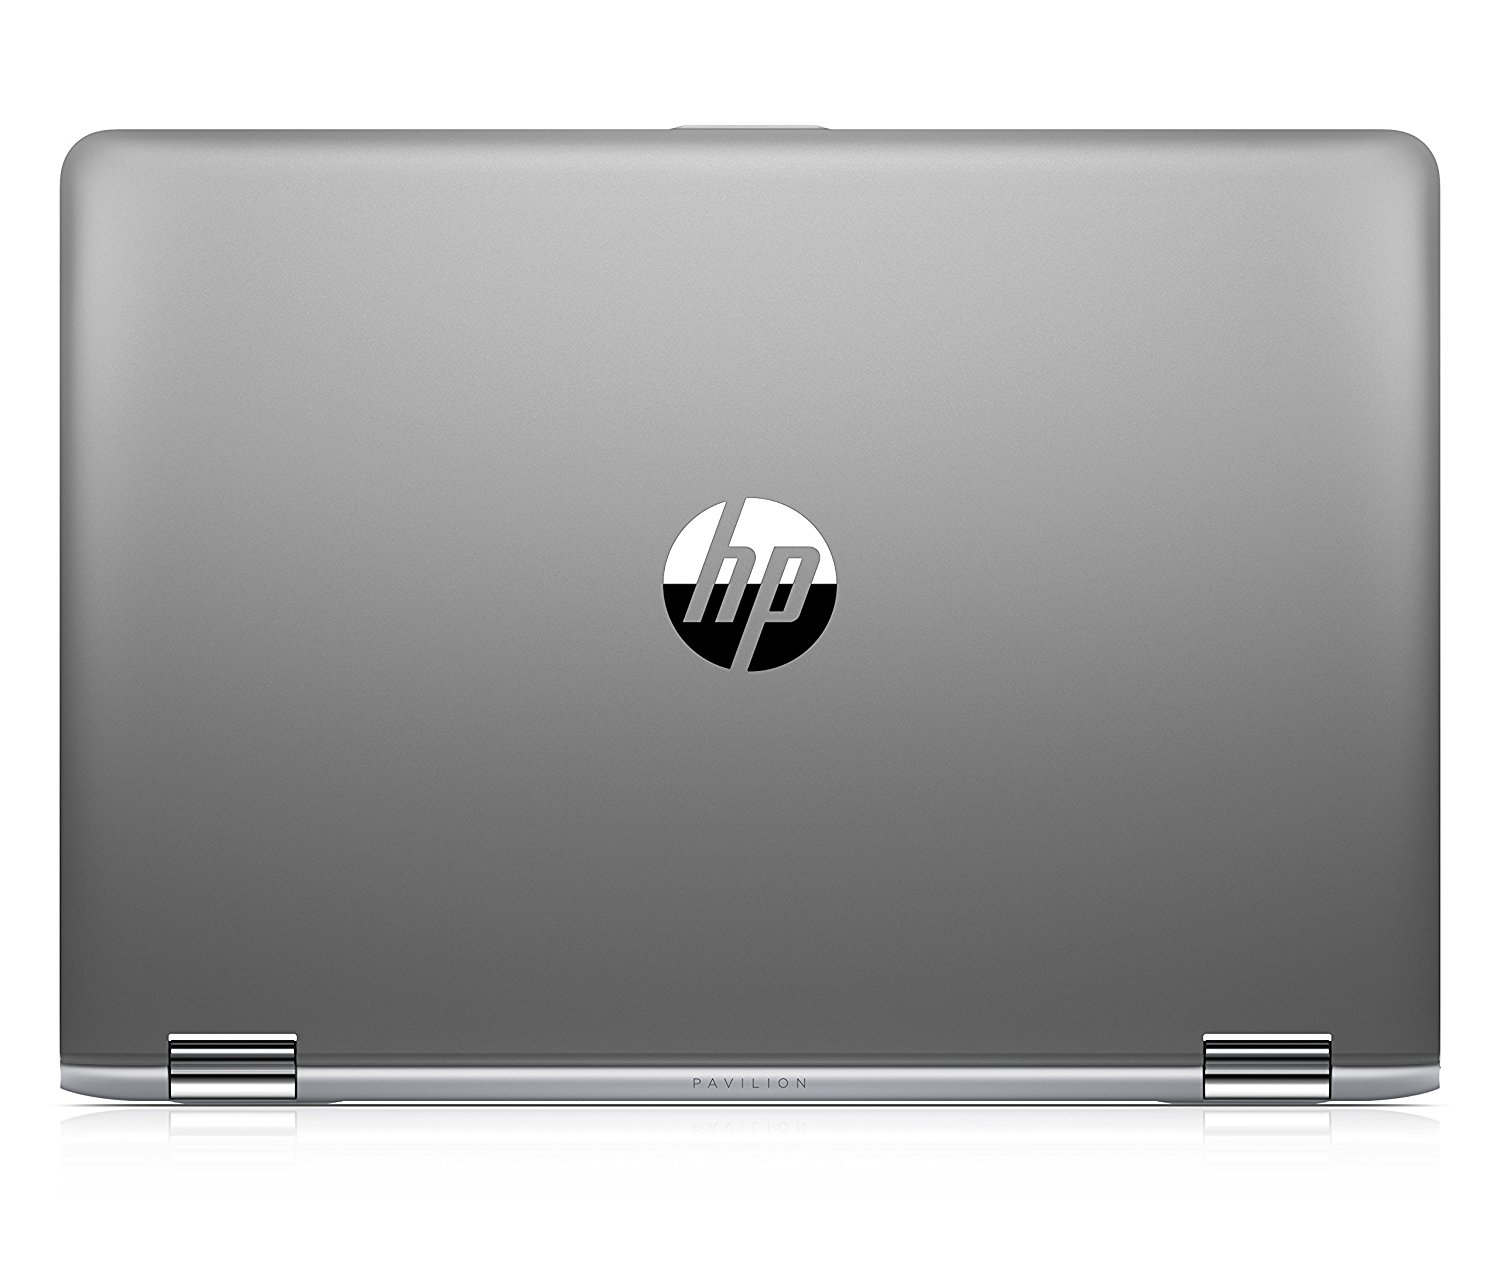 HP Pavilion x360 15-br004nw